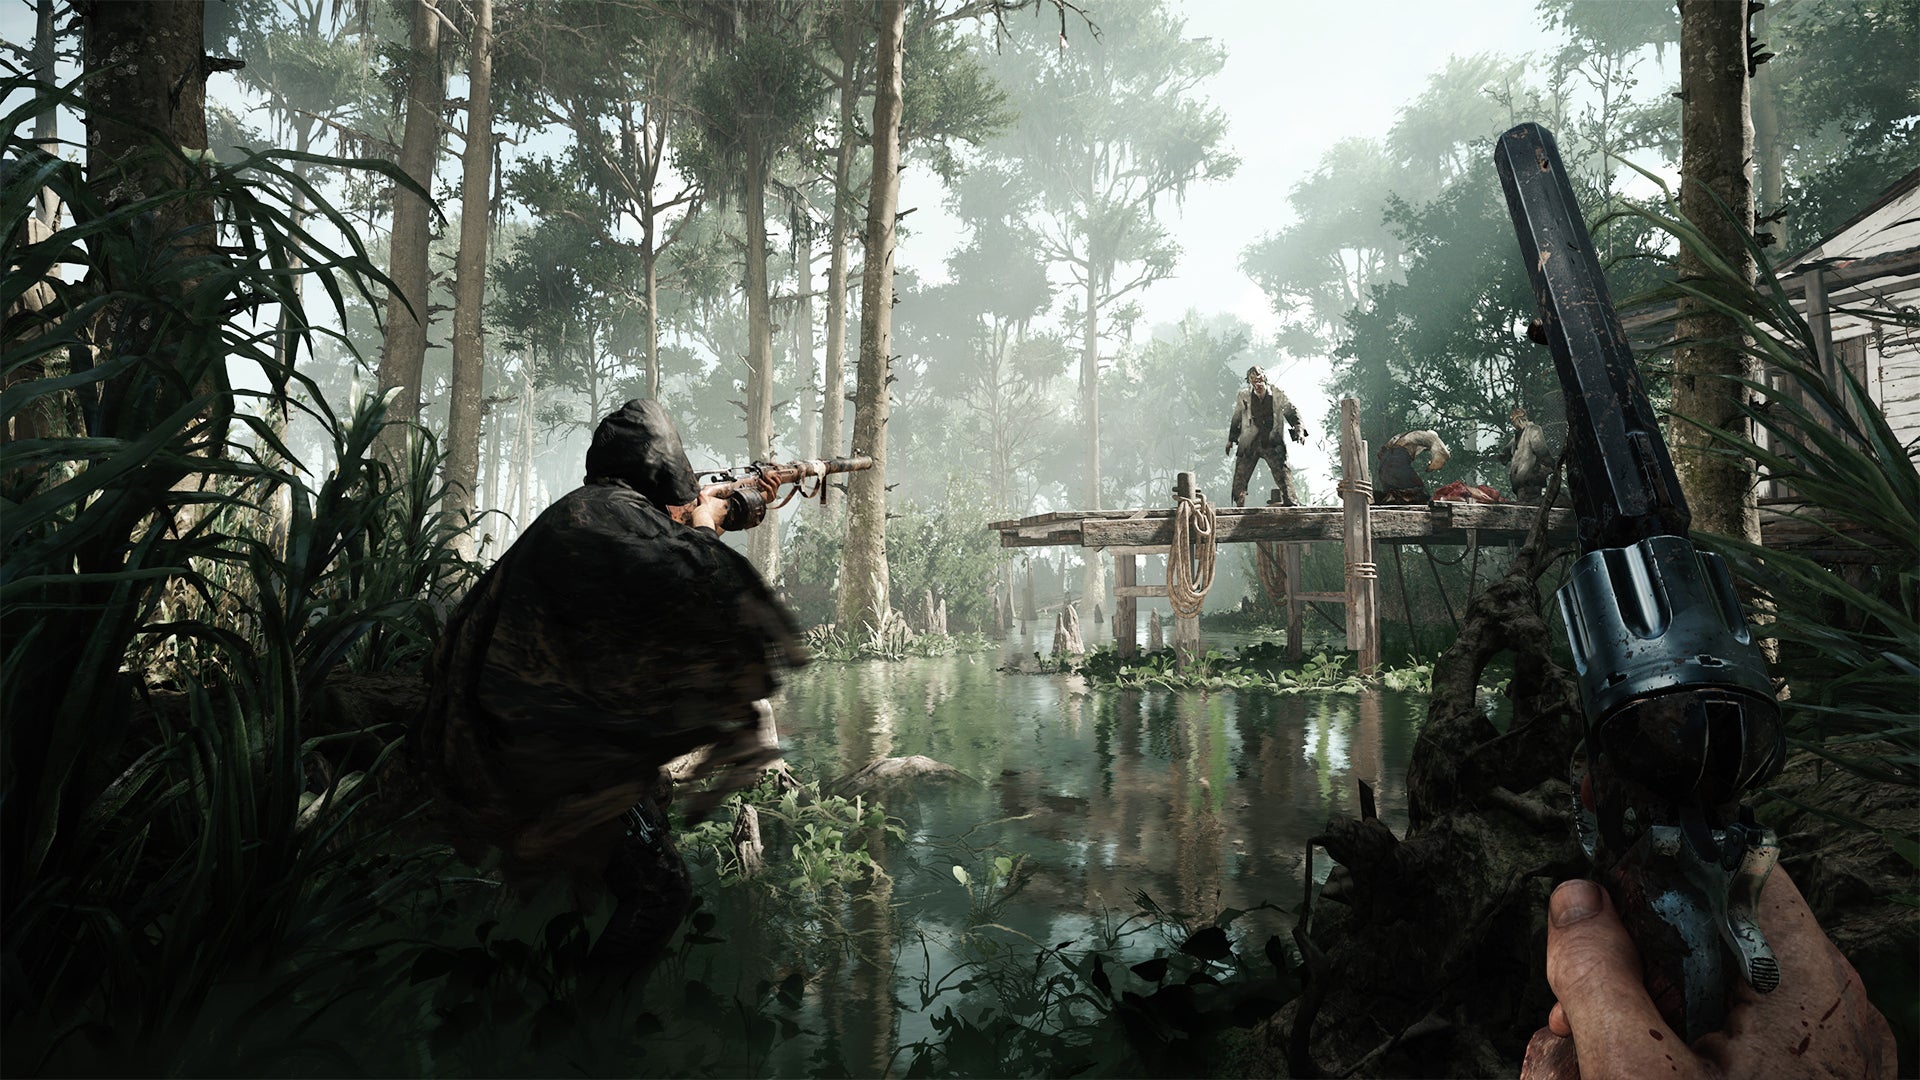 A Hunt: Showdown screenshot in which two players, waist-deep in swampwater, prepare to kill a Grunt standing on a pier in front of them.